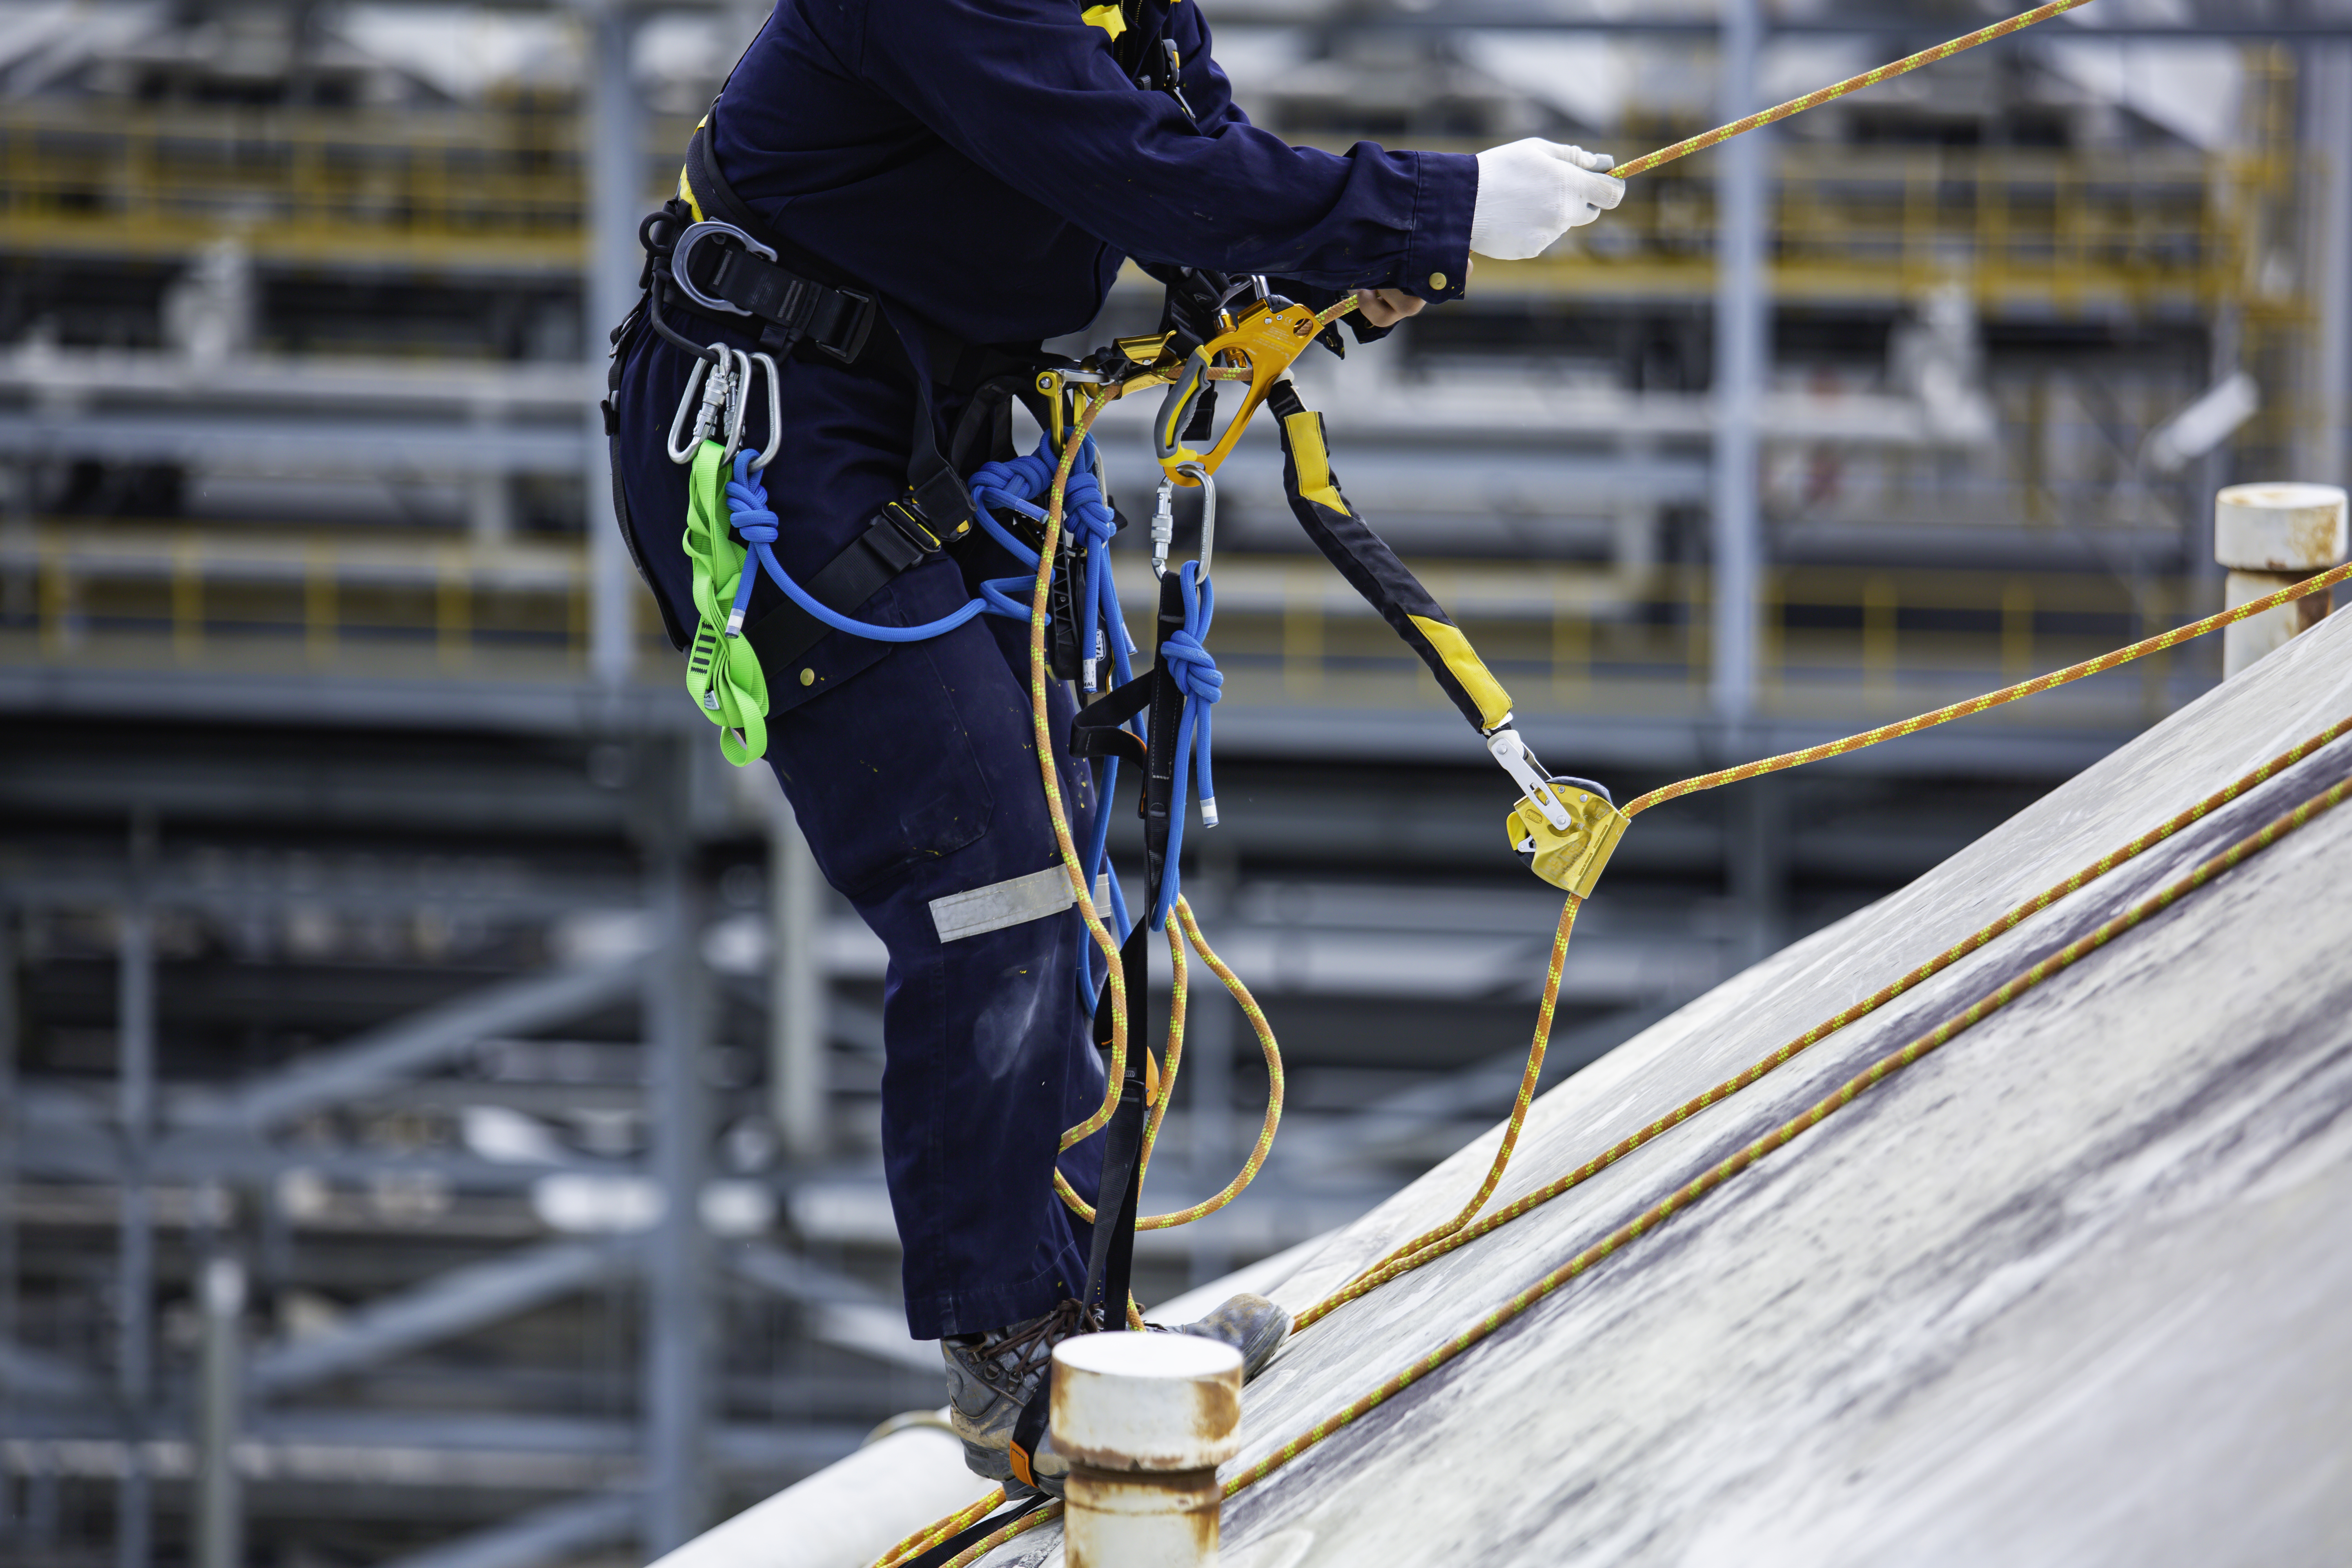 Roofer on steep roof using fall protecion equipment.